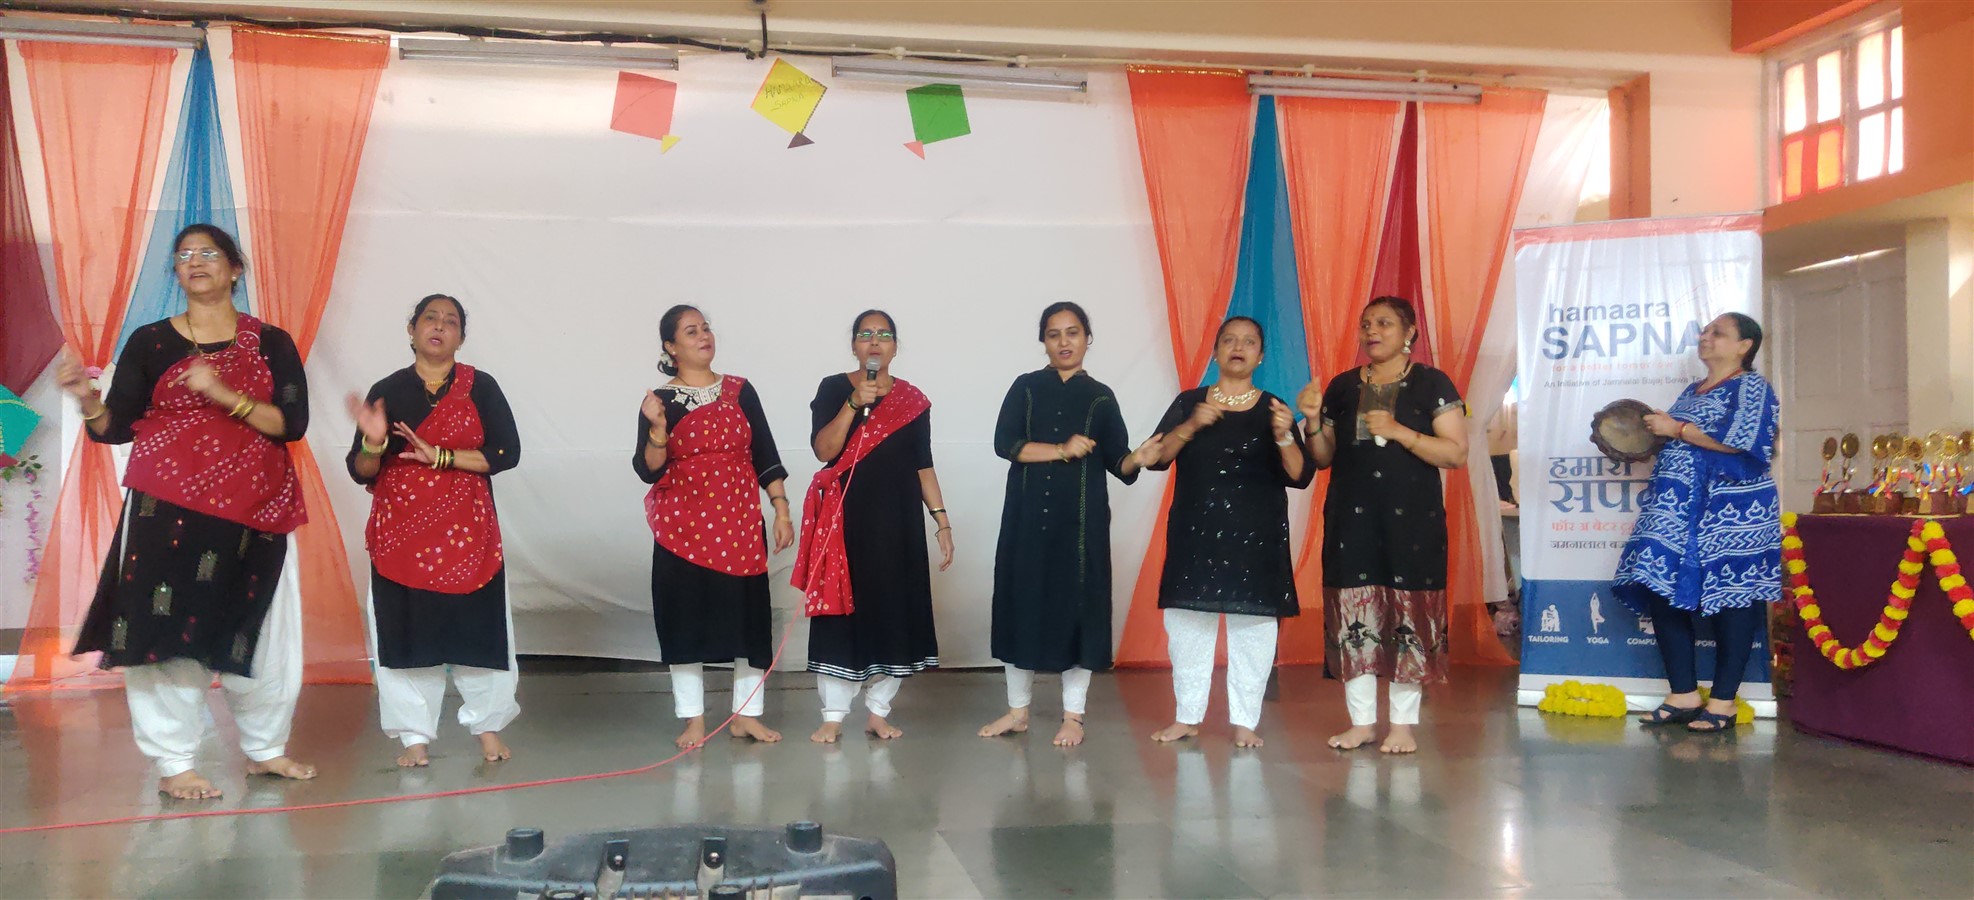 Hindi group song by beneficiaries - enjoying and grooving to the music